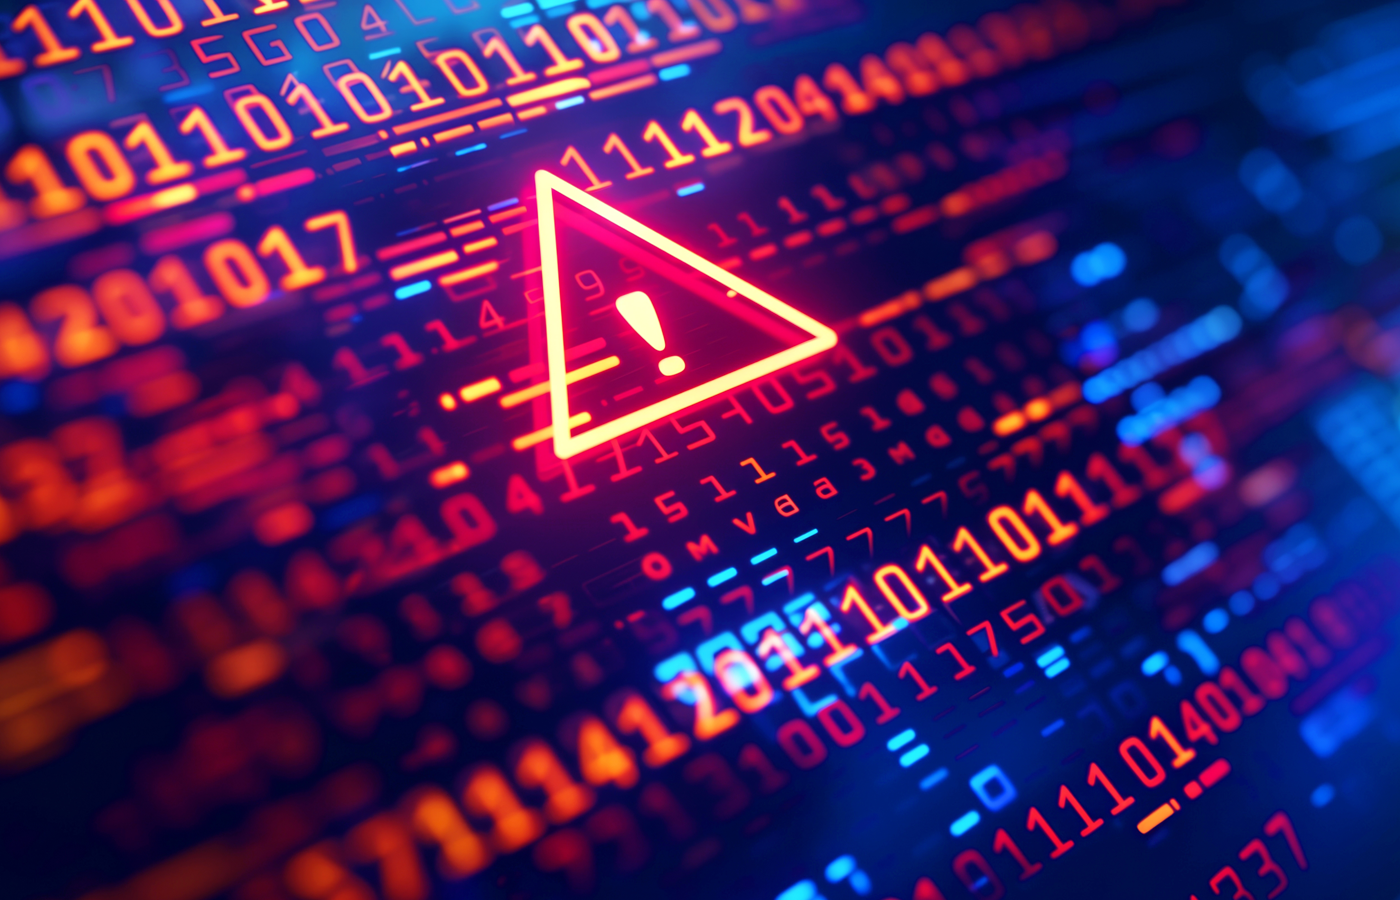 A digital alert icon over glowing binary code represents a cybersecurity threat or data breach.